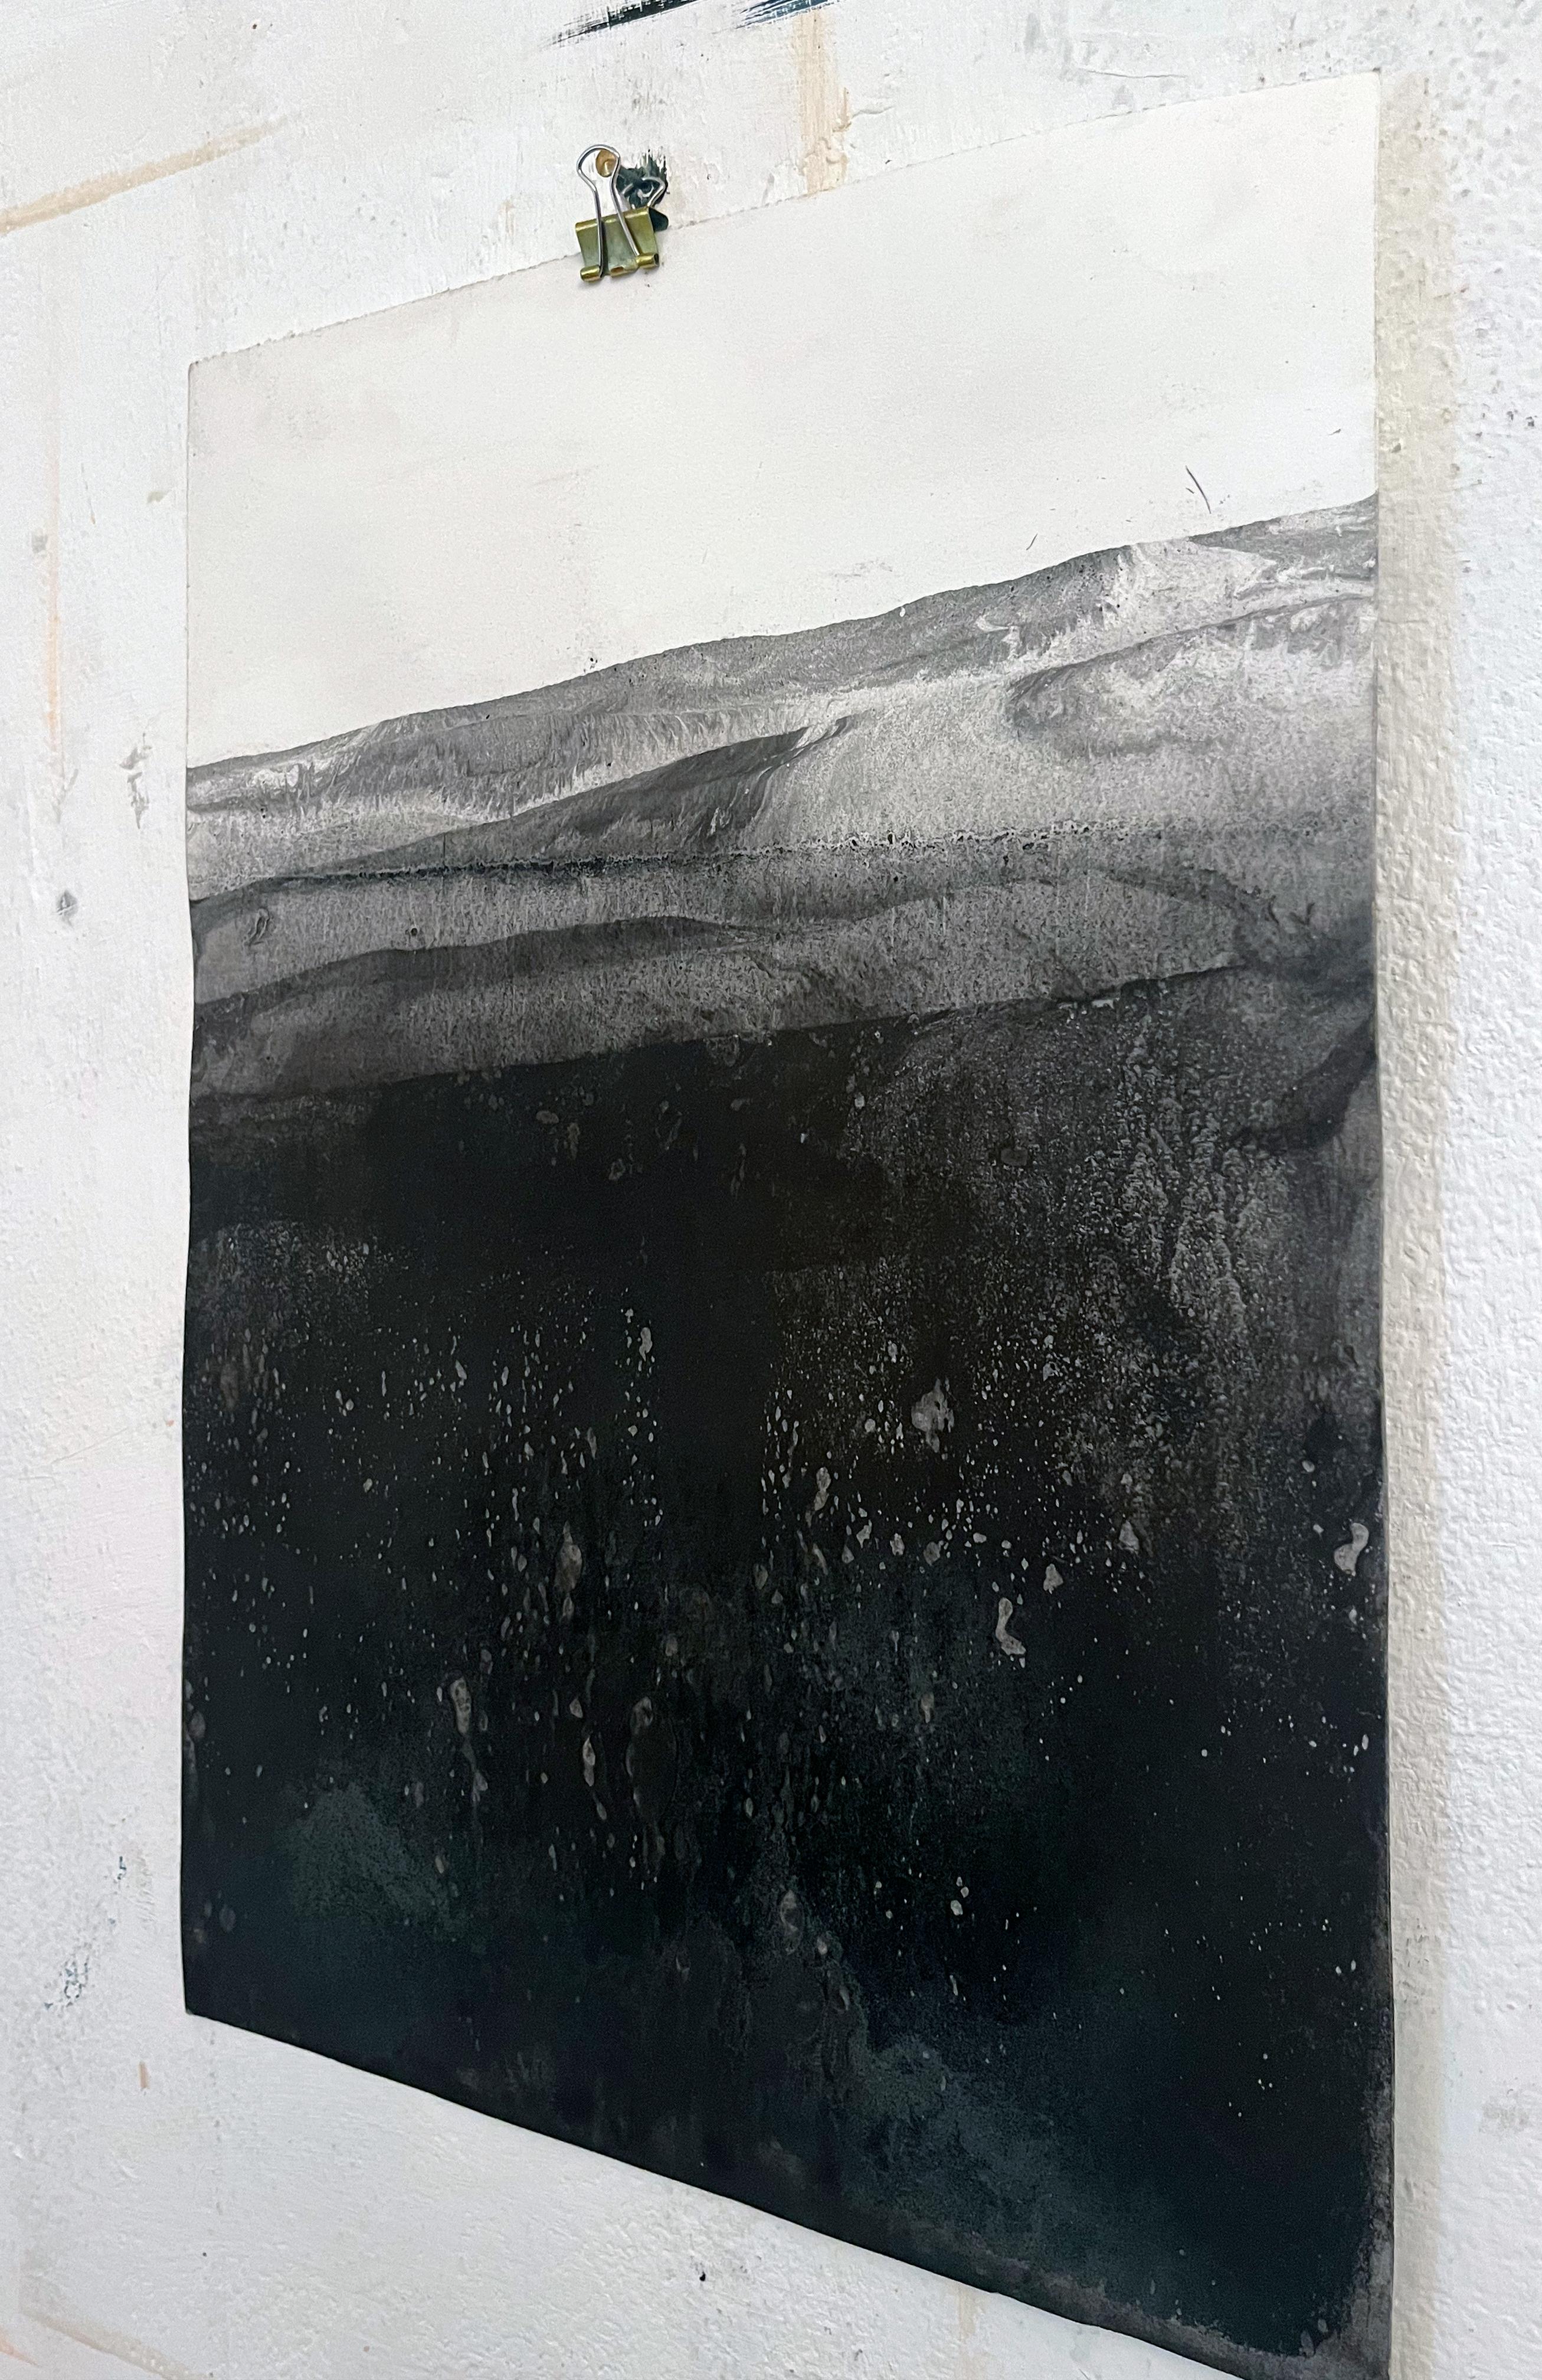 Landscape
mineral oxide on paper (canson Paper 300gr)
30x40 cm
Original Art 
Authenticity certificate
one of a kind

Marilina Marchica, born in 1984, was born in Agrigento, where she lives and works. She graduated in Painting at the Academy of Fine